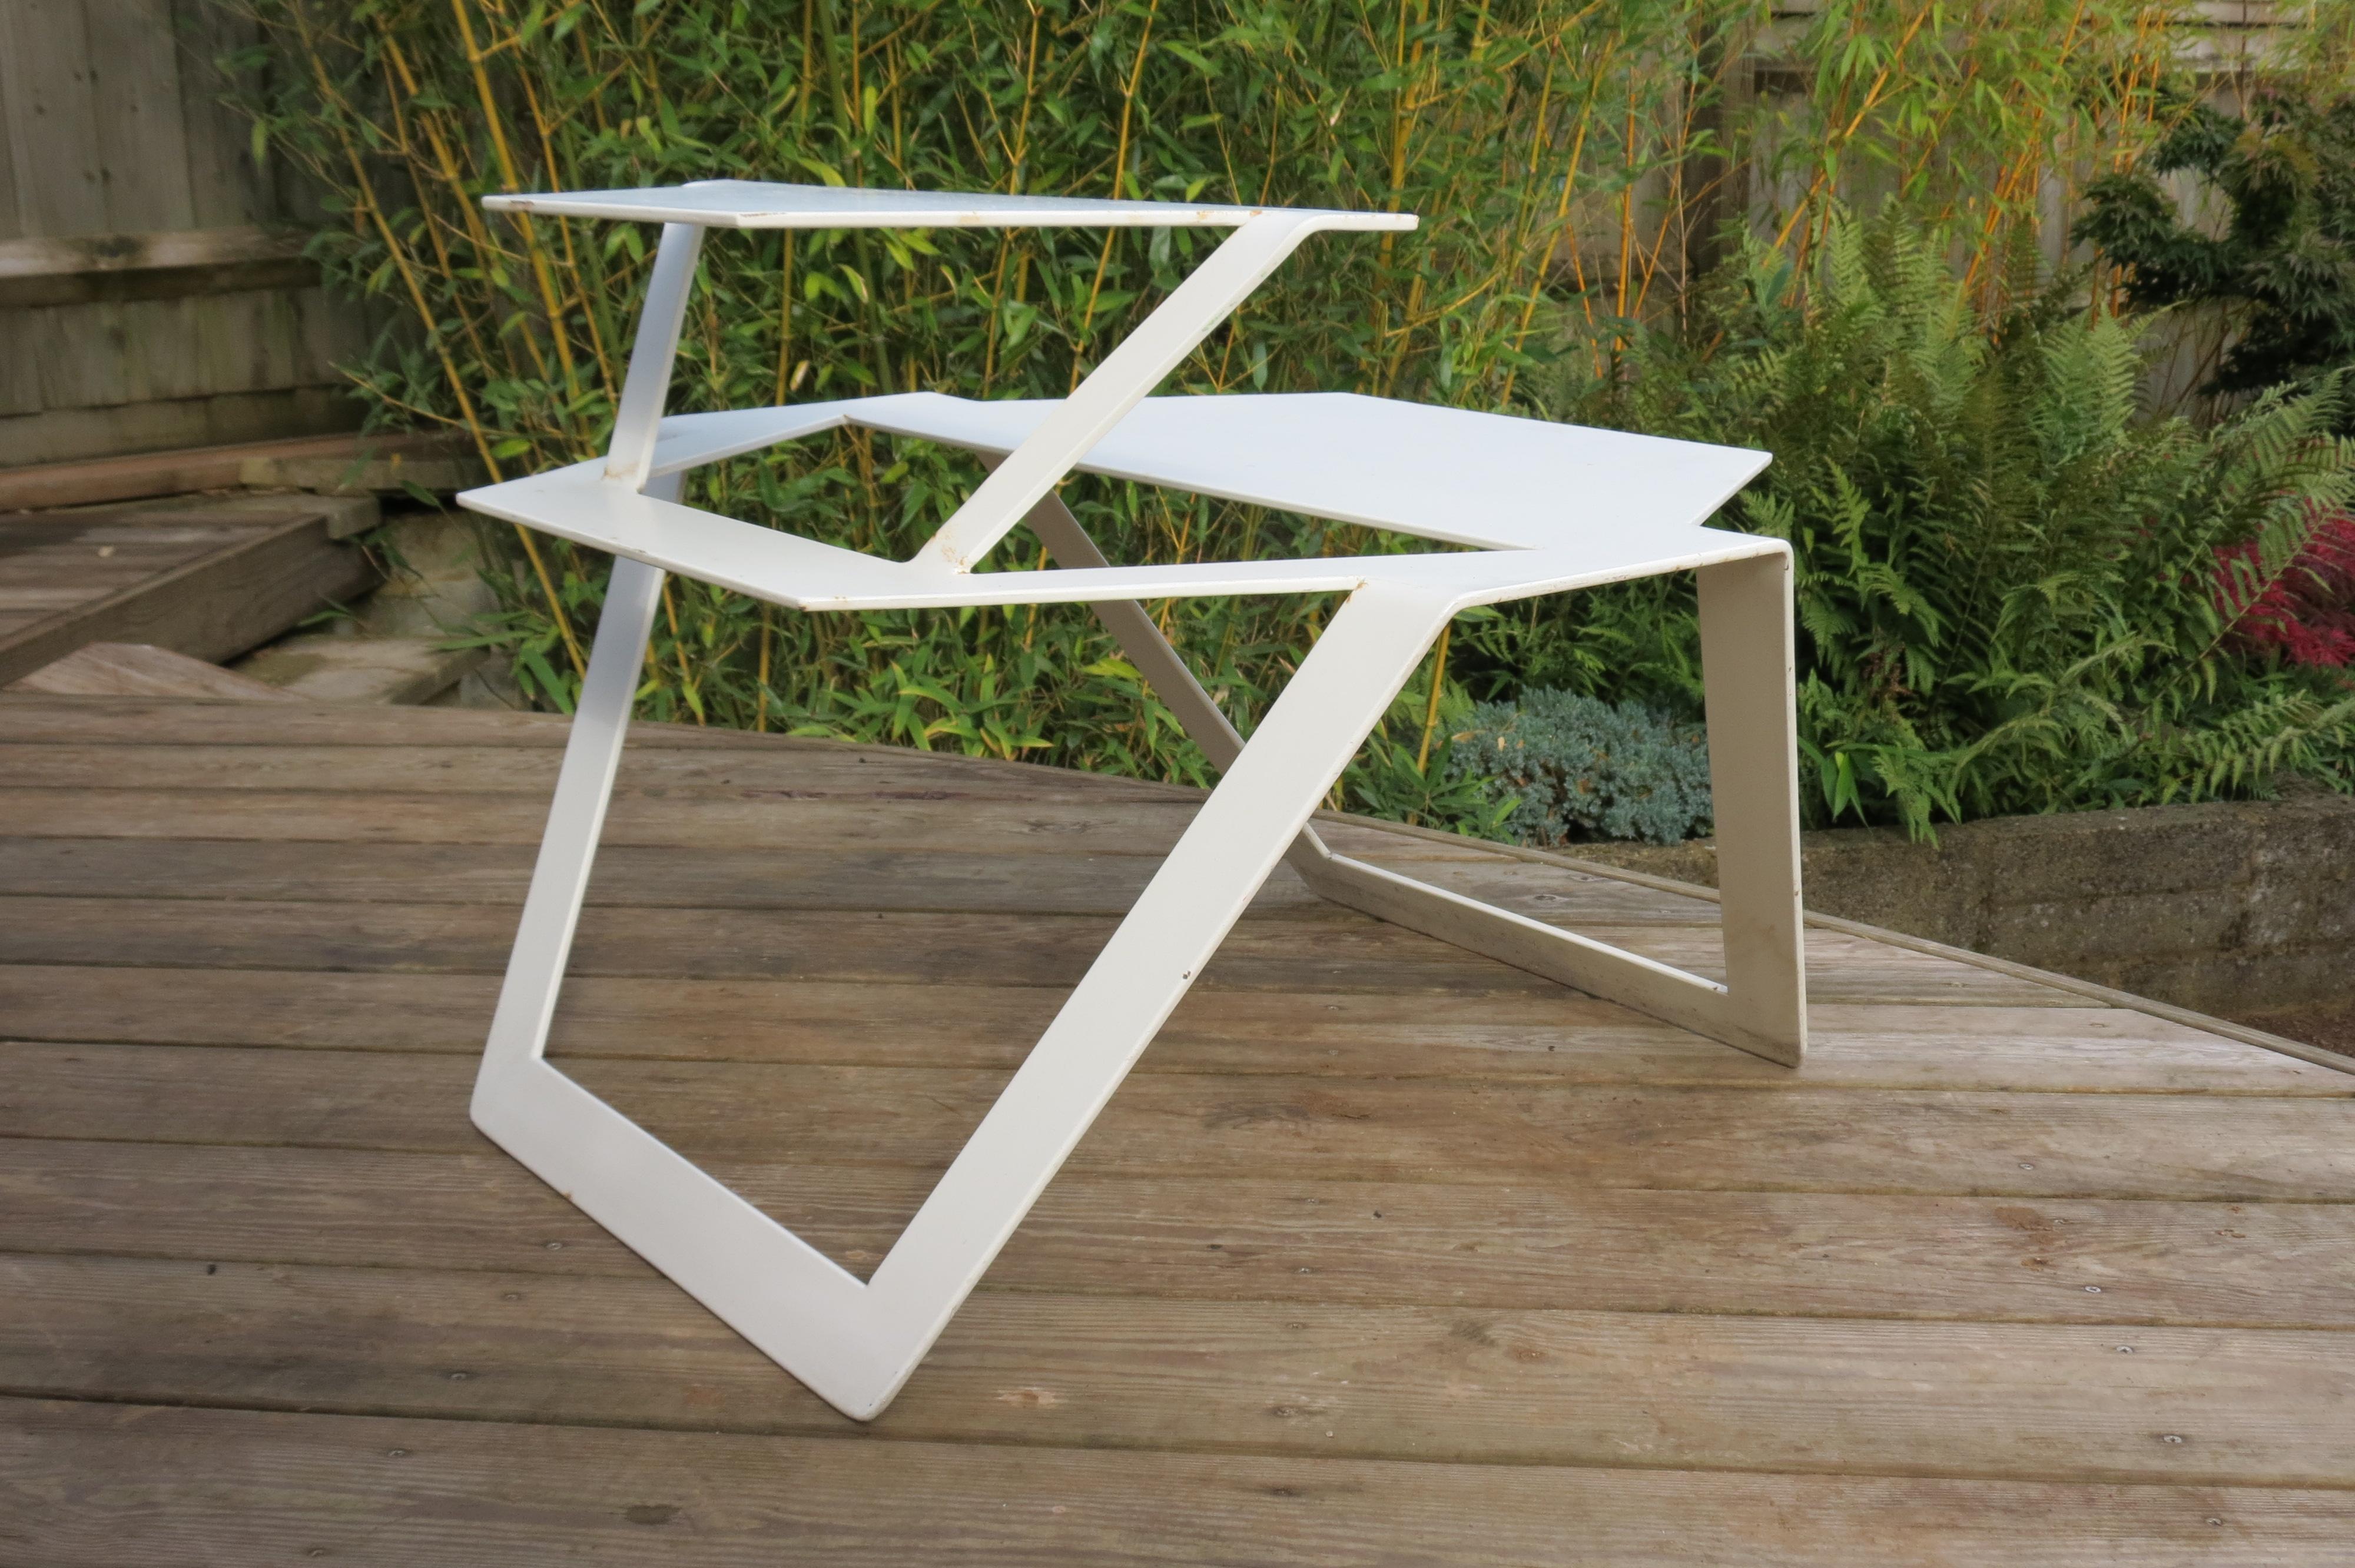 A very good quality metal table from the 1990s, good quality thick steel. Very cleverly cut and formed from one sheet of metal. Possibly a prototype. Very heavy good quality, well constructed table.
Good over-all condition, some wear, marks and